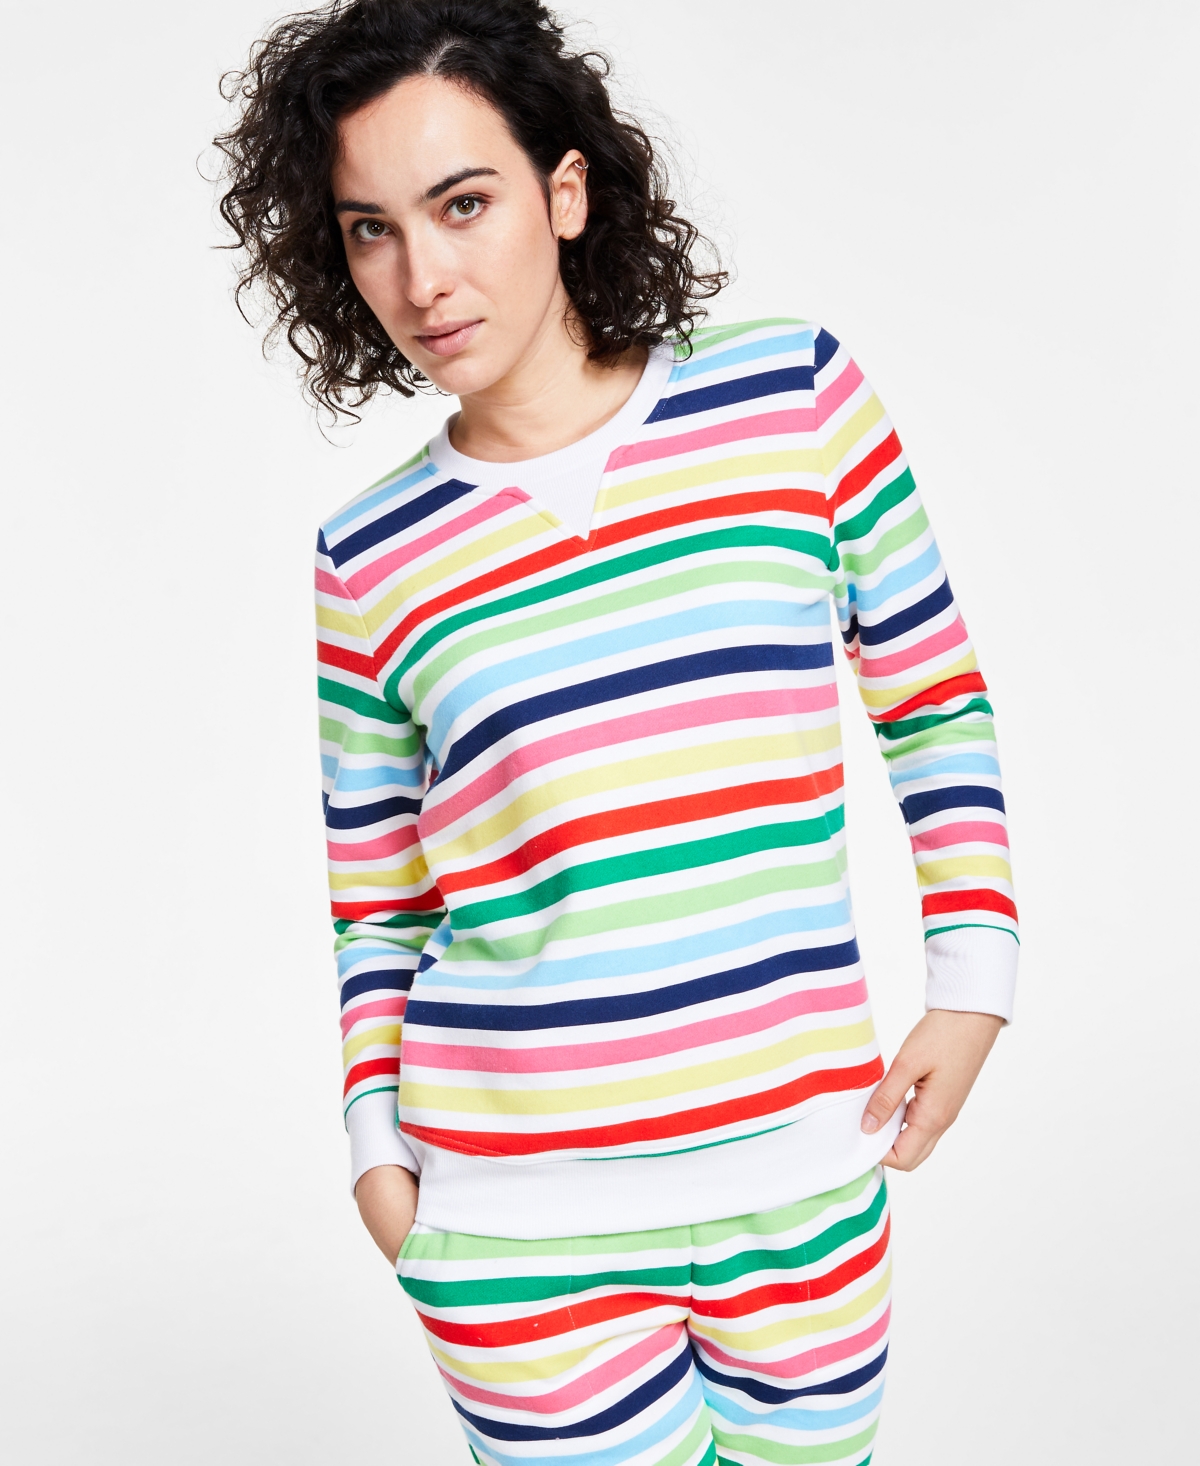 Charter Club Women's Printed Stripe Matching Crewneck Top, Created for Macy's